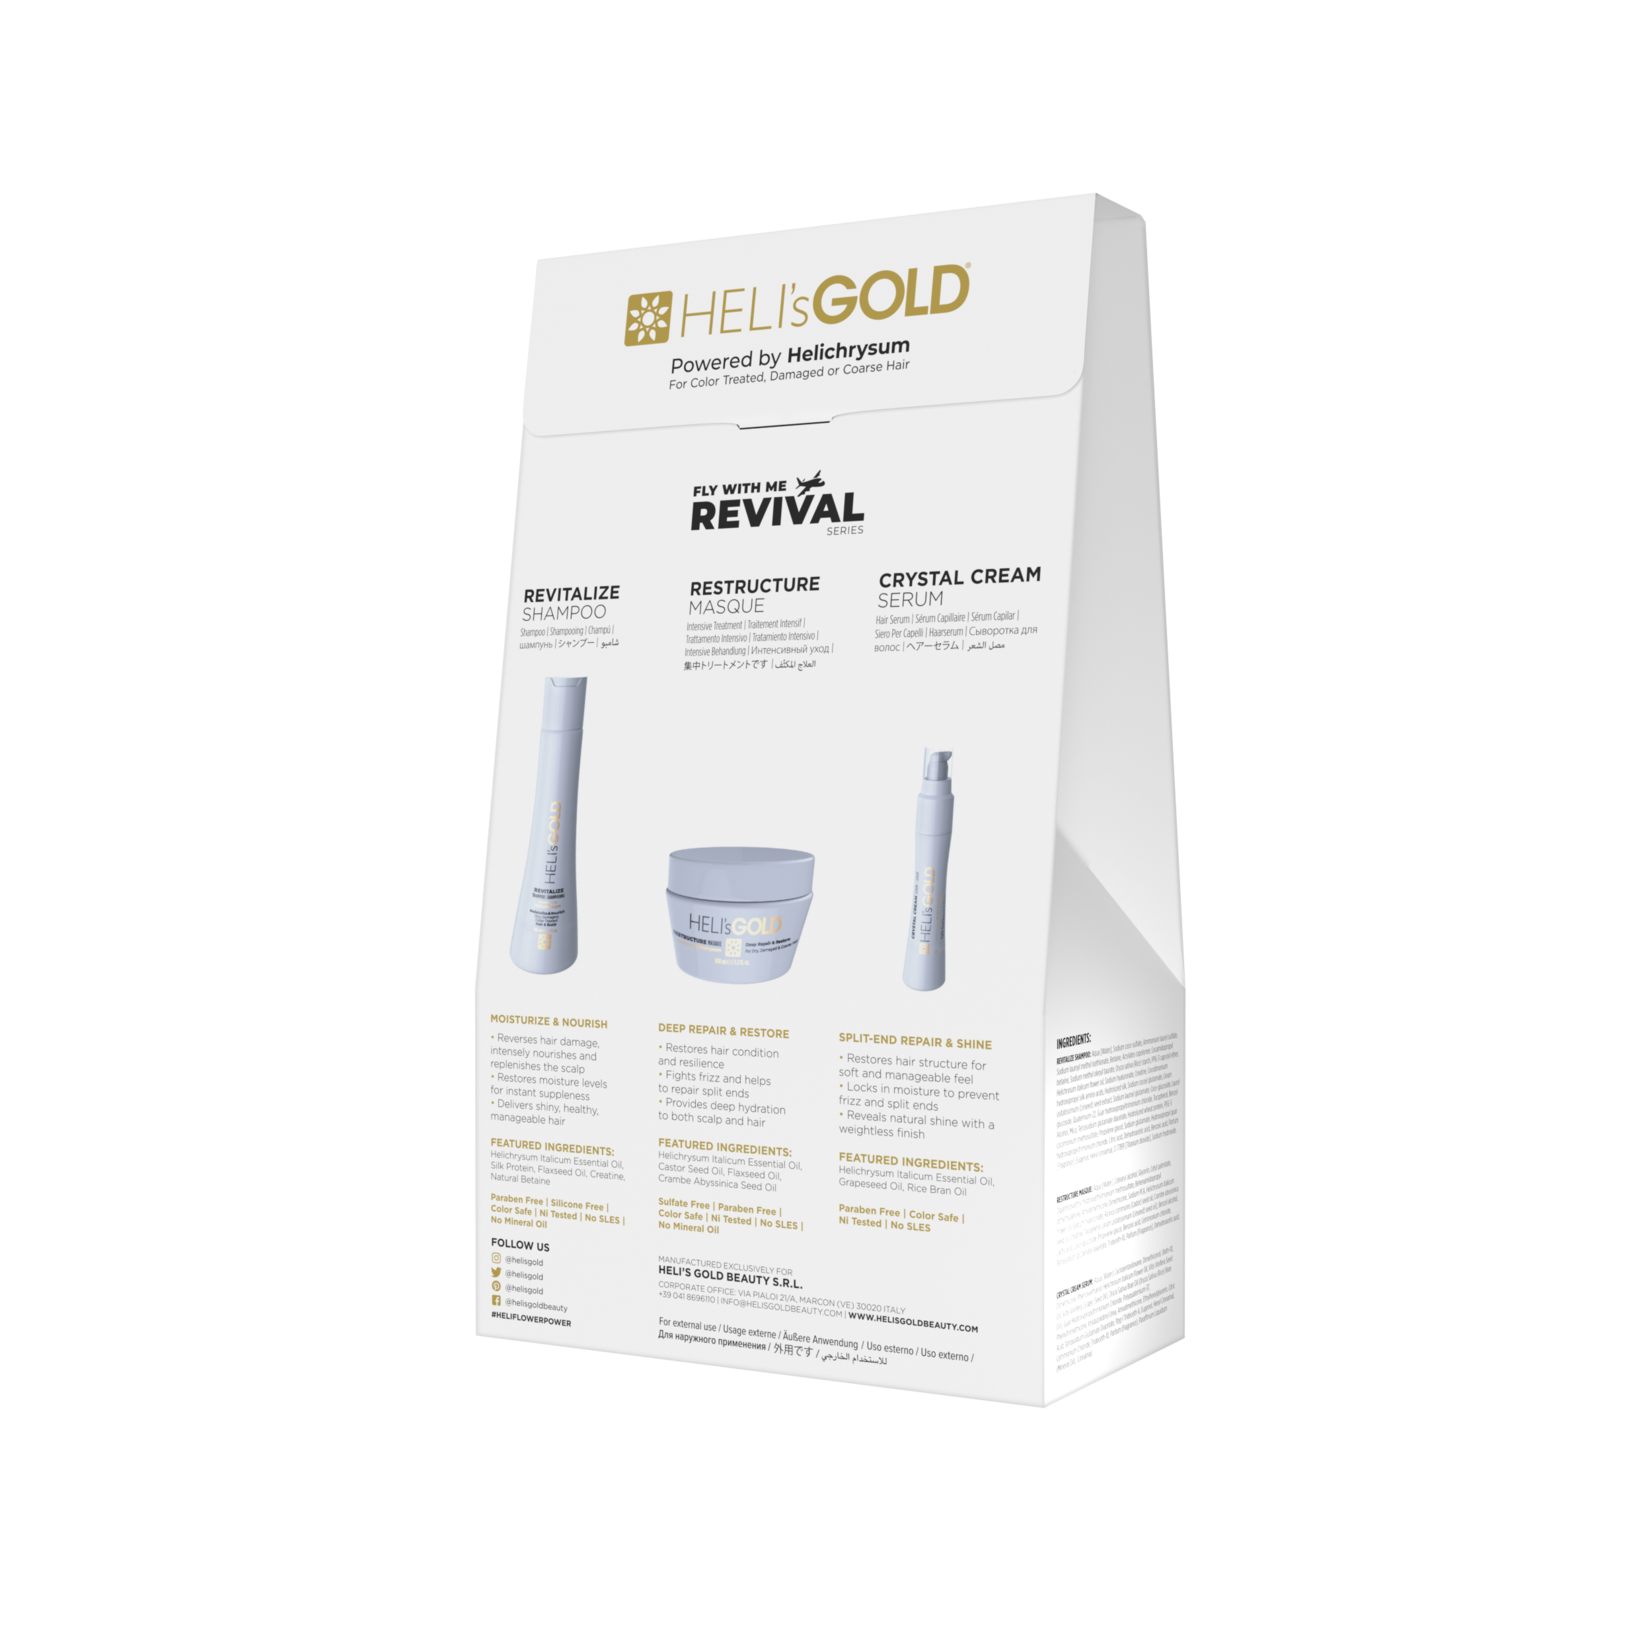 Heli's Gold Revival Series Fly with Me Kit